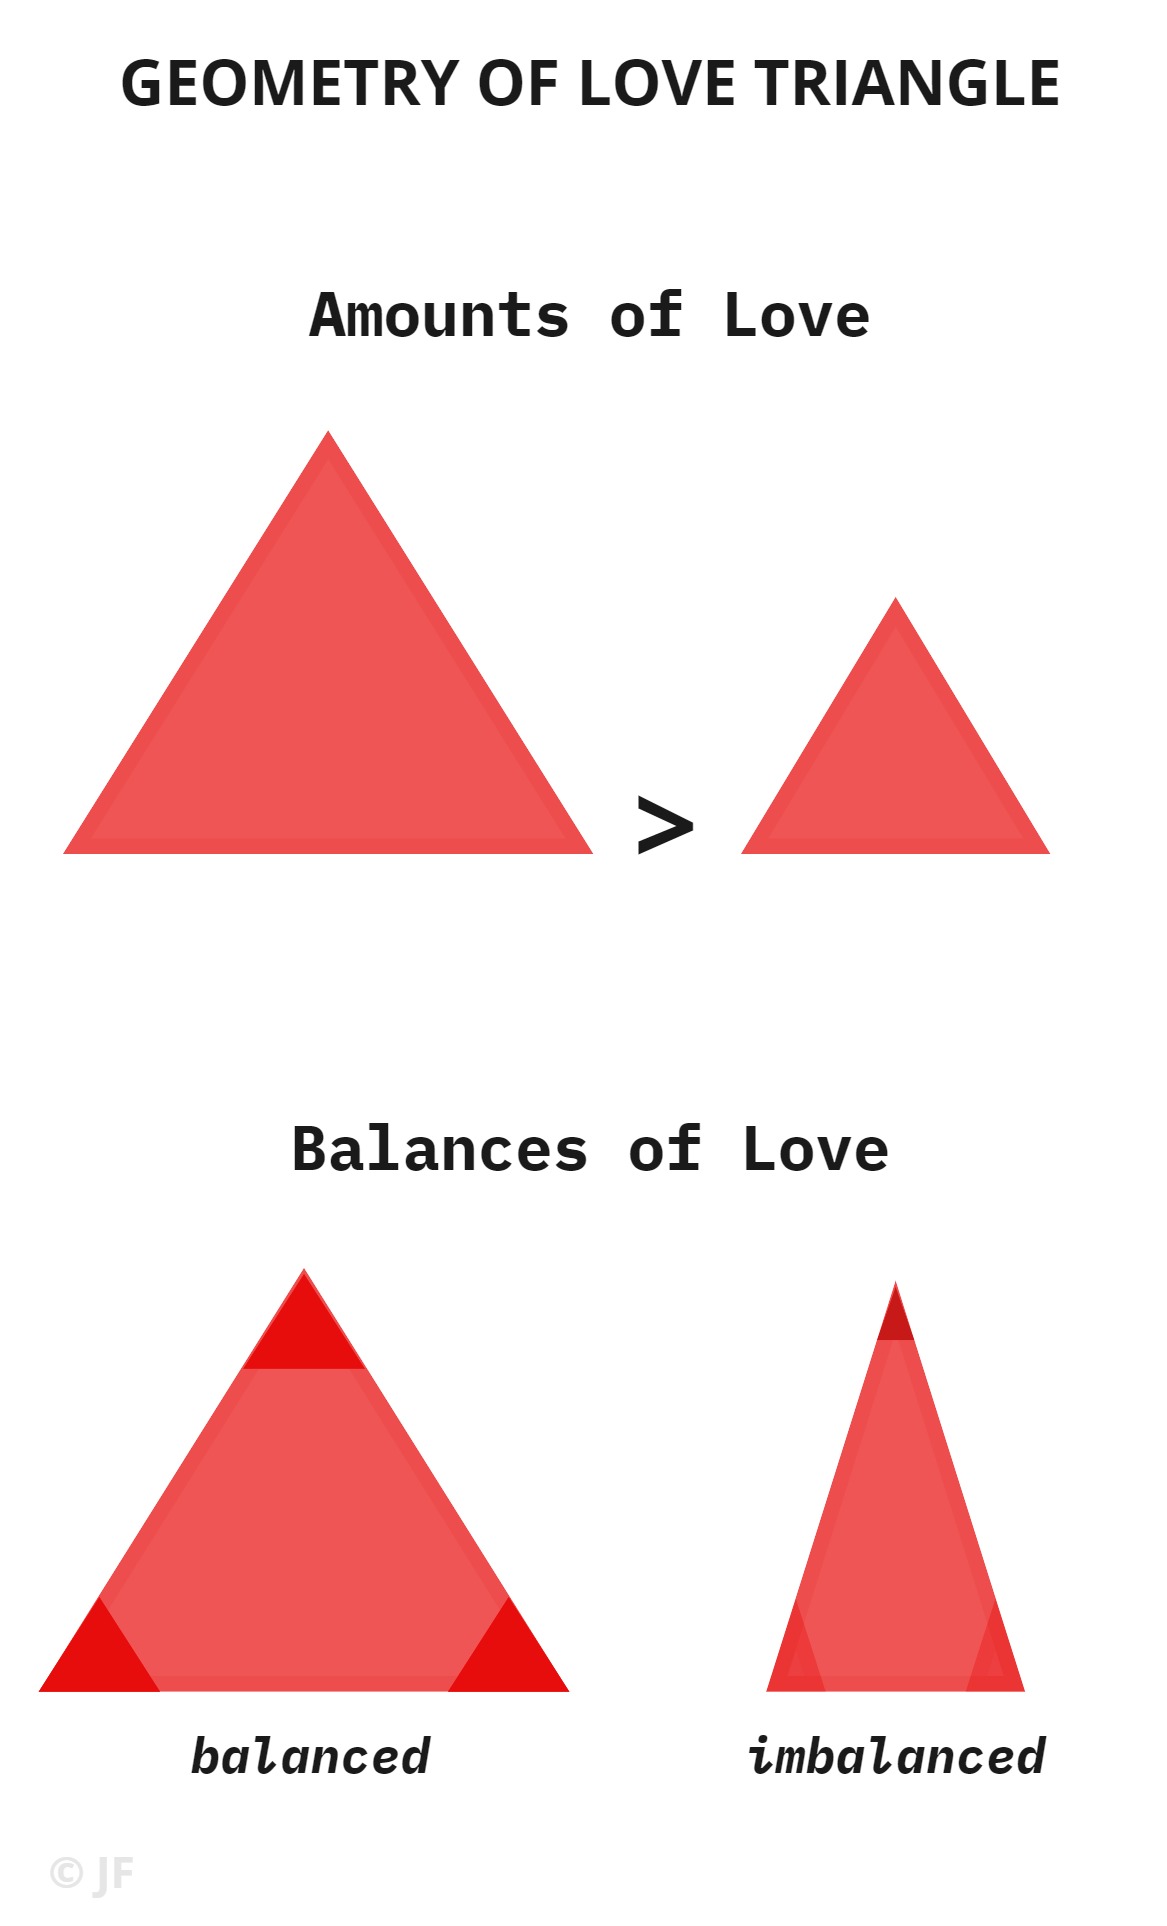 thesis statement about love triangle